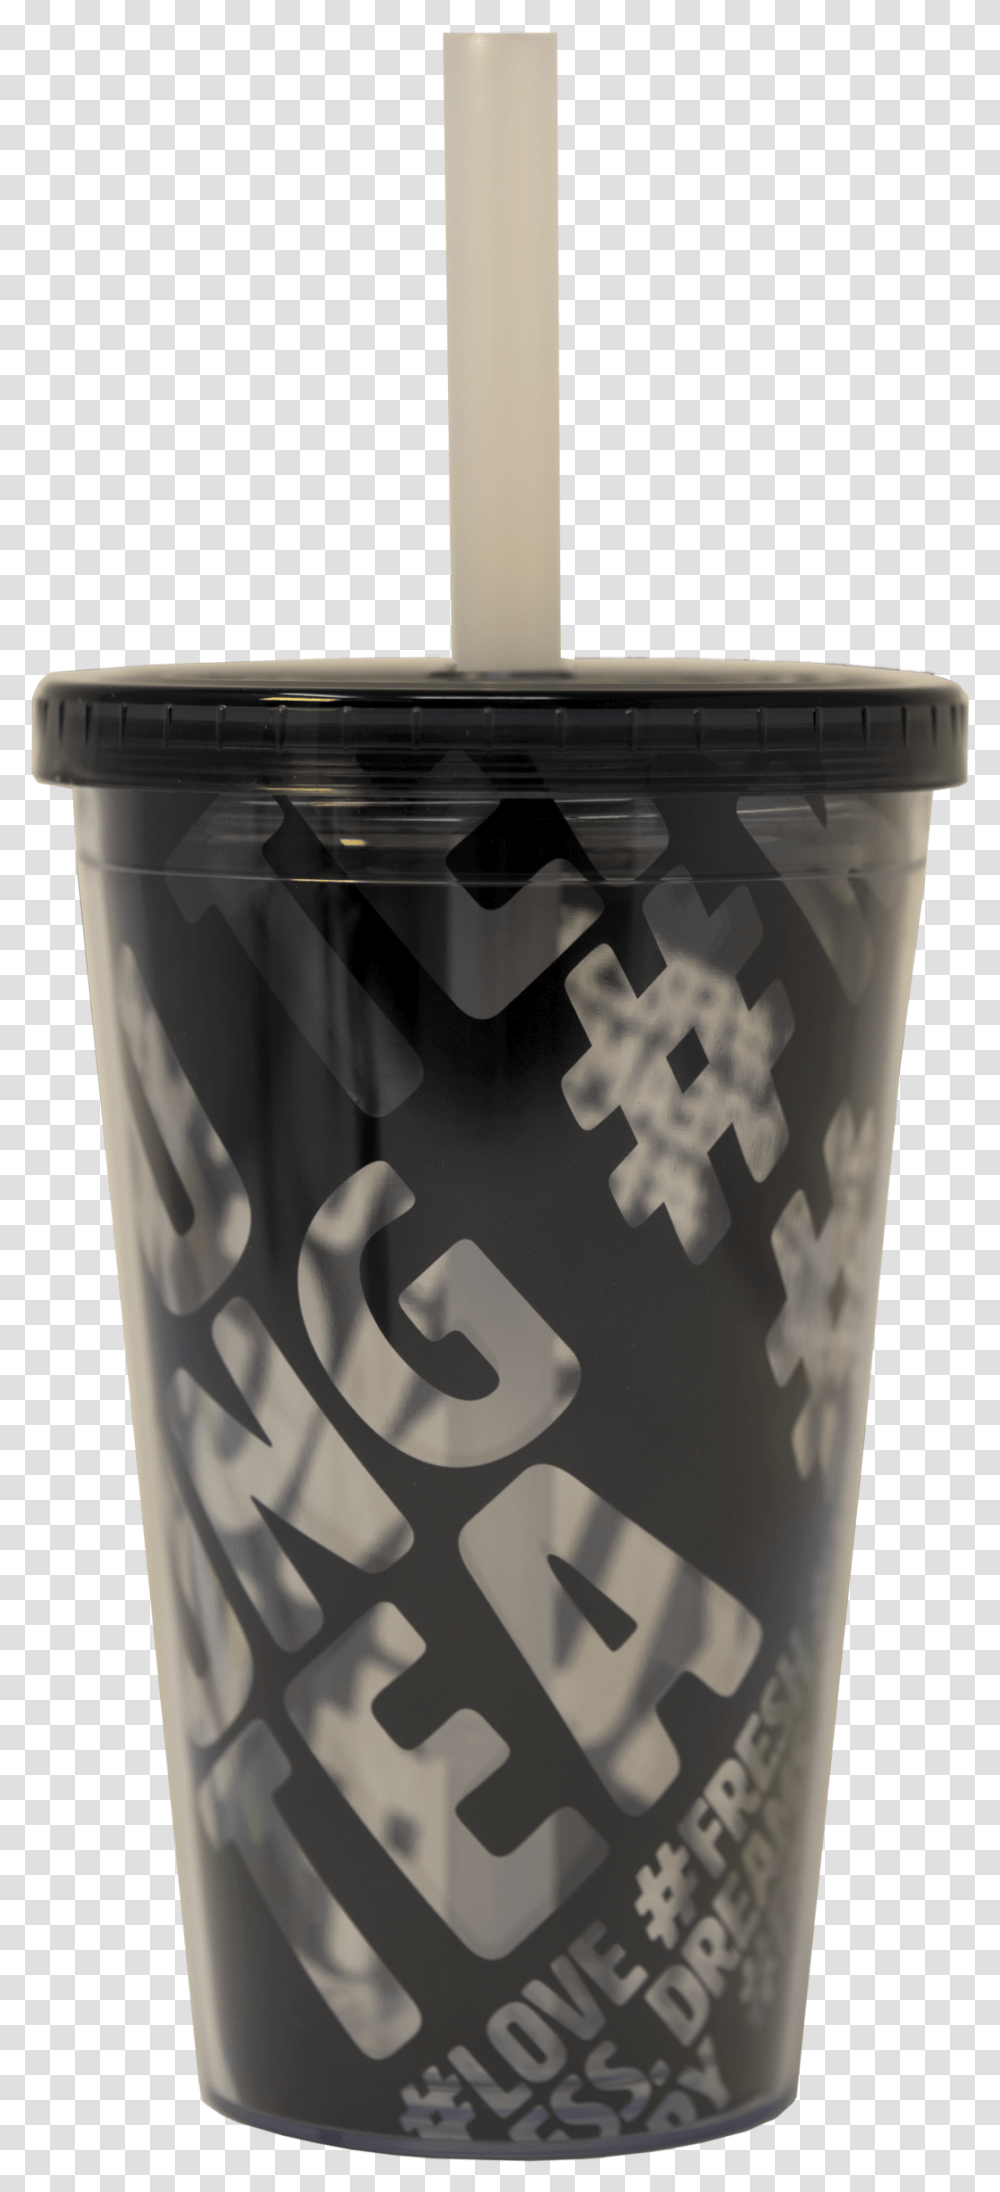 Christmas Hat Tumblr Sipordie Social Media Tumblr V5 Cup, Bottle, Shaker, Bucket, Coffee Cup Transparent Png